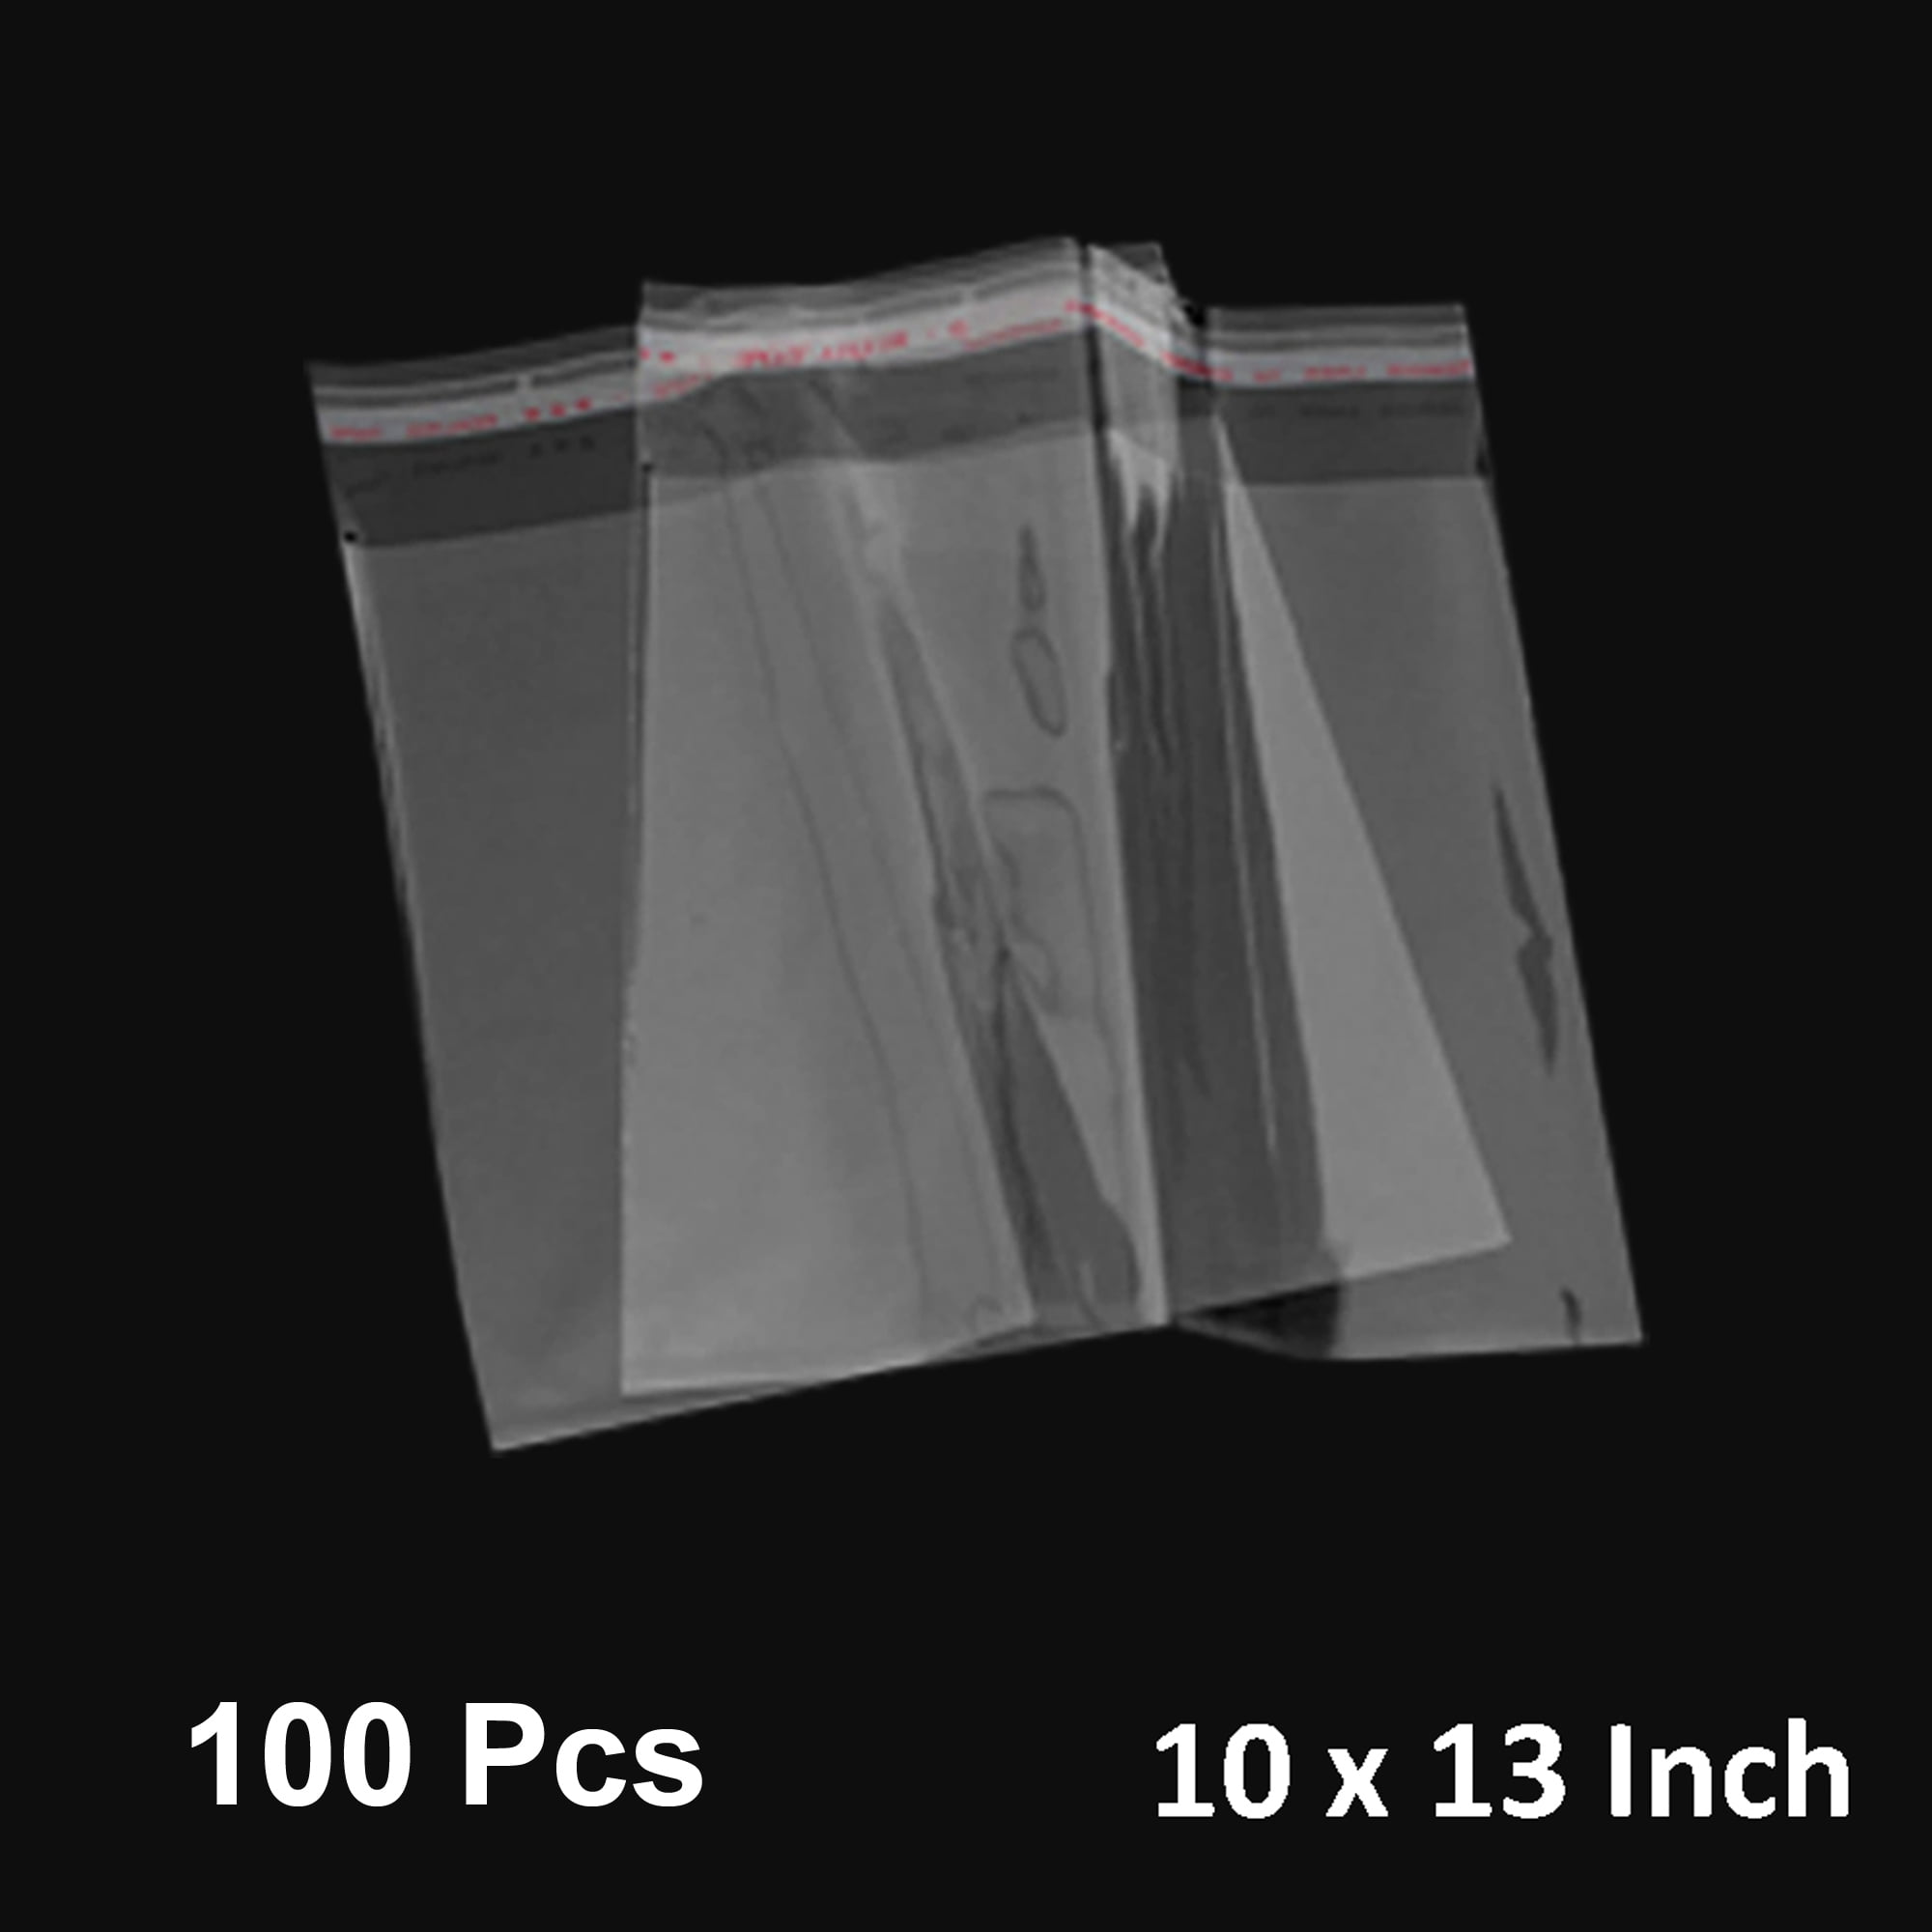 100 CLEAR 22 x 22 POLY BAGS PLASTIC LAY FLAT OPEN TOP PACKING ULINE BEST 1 MIL 